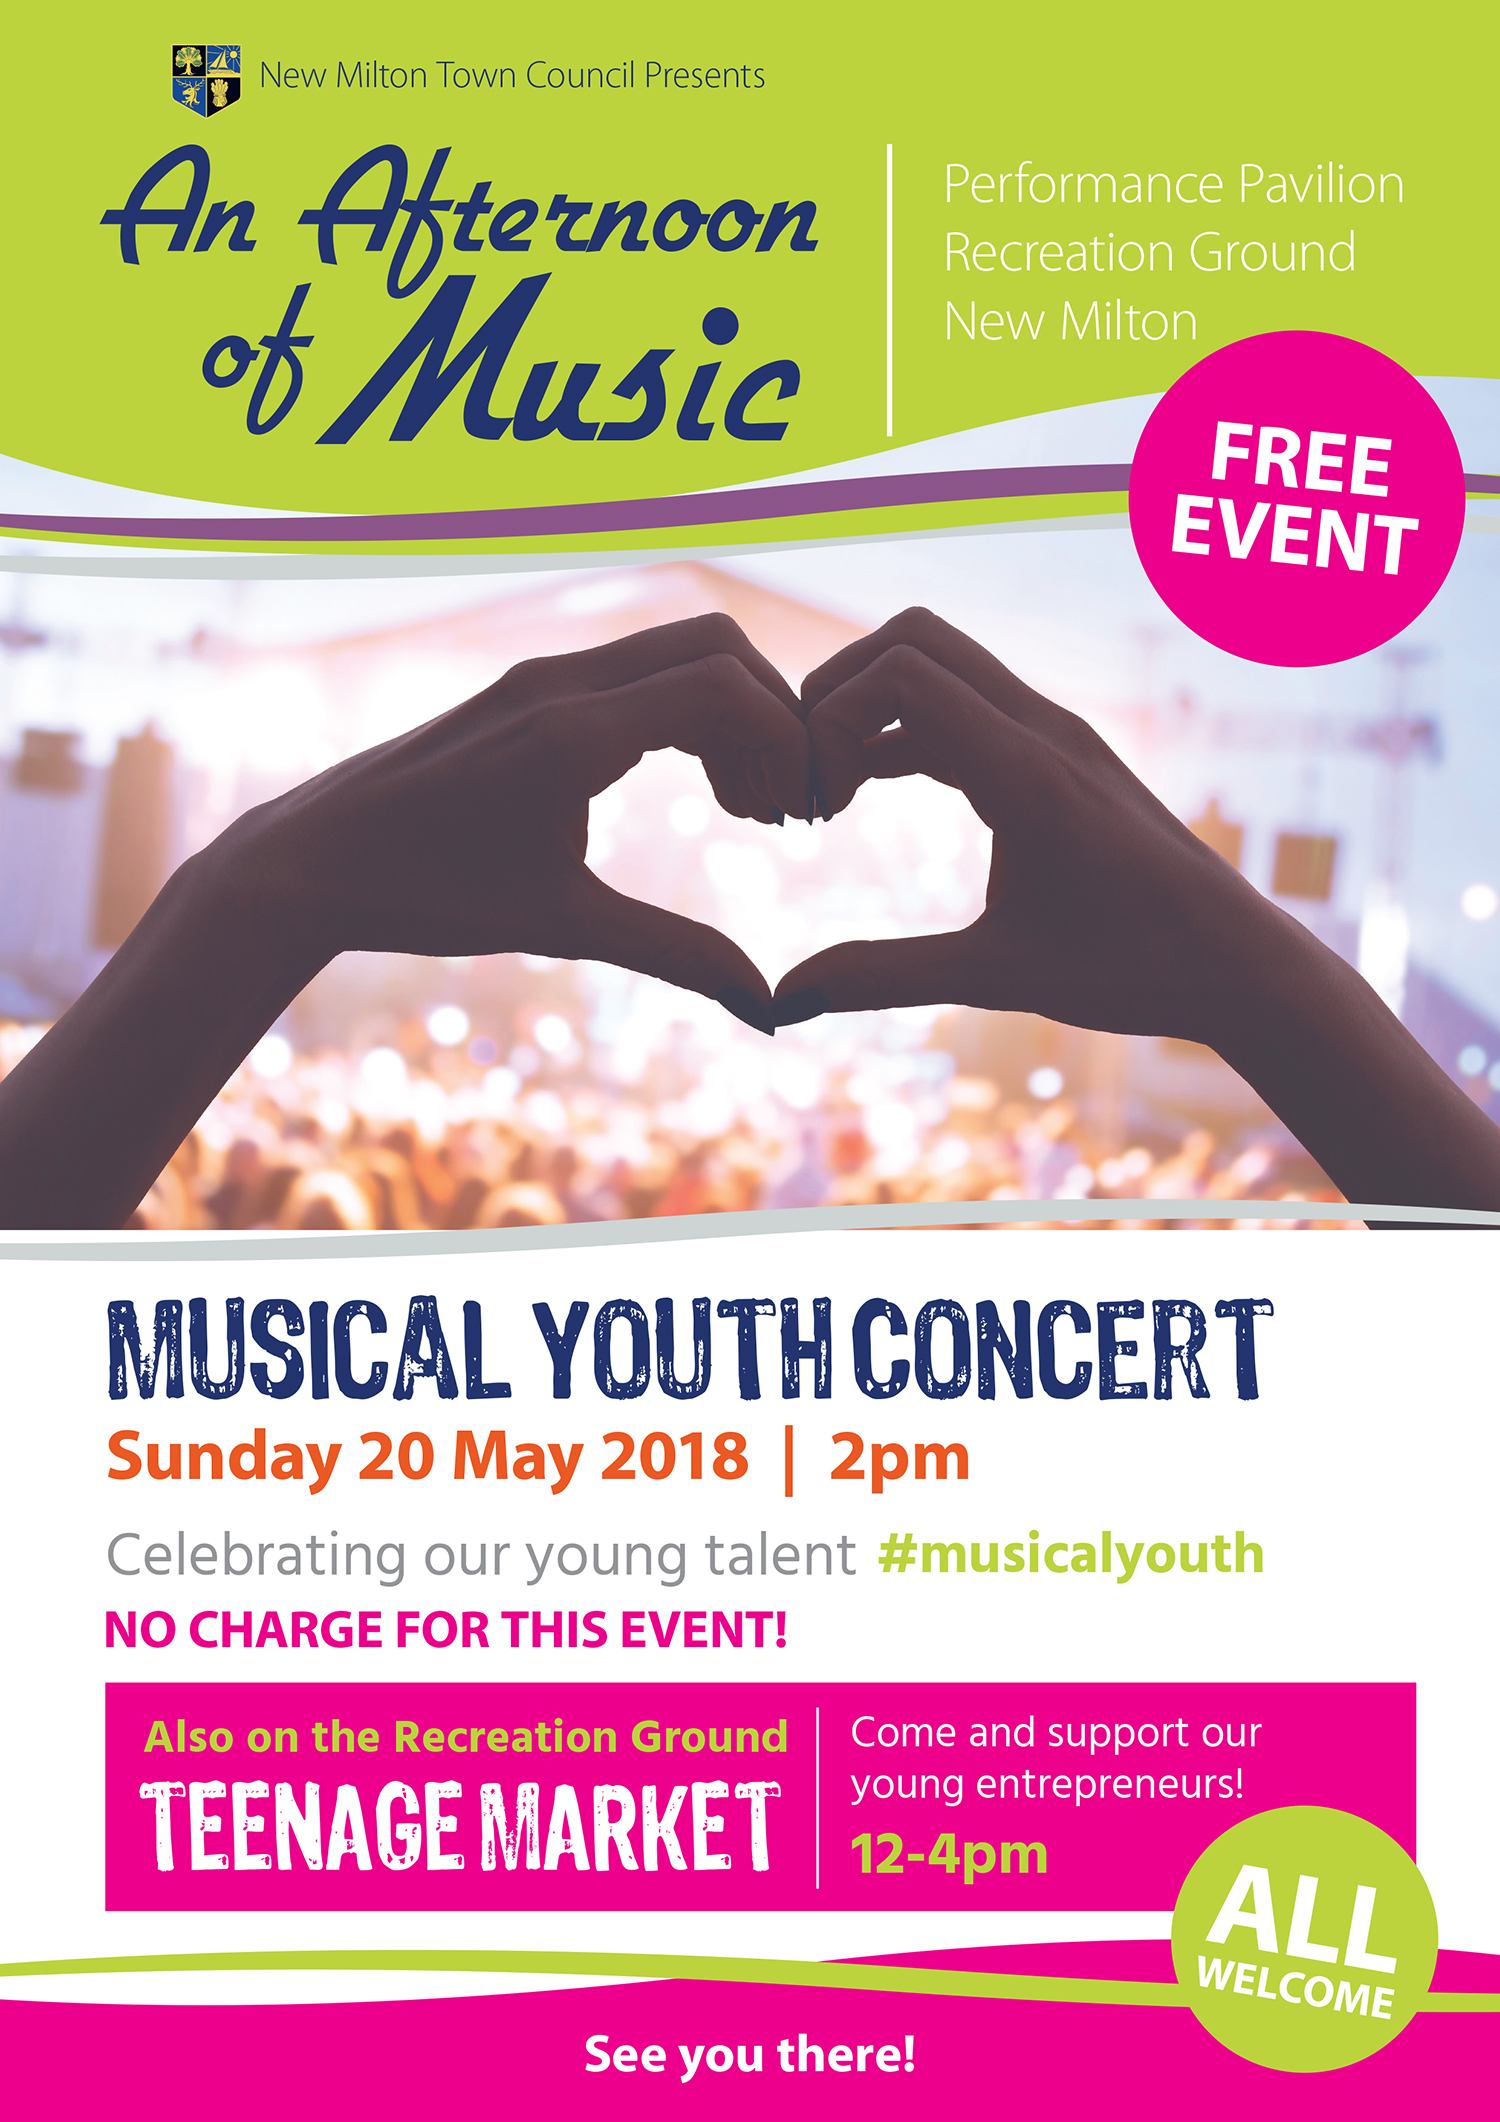 Musical Youth Concert